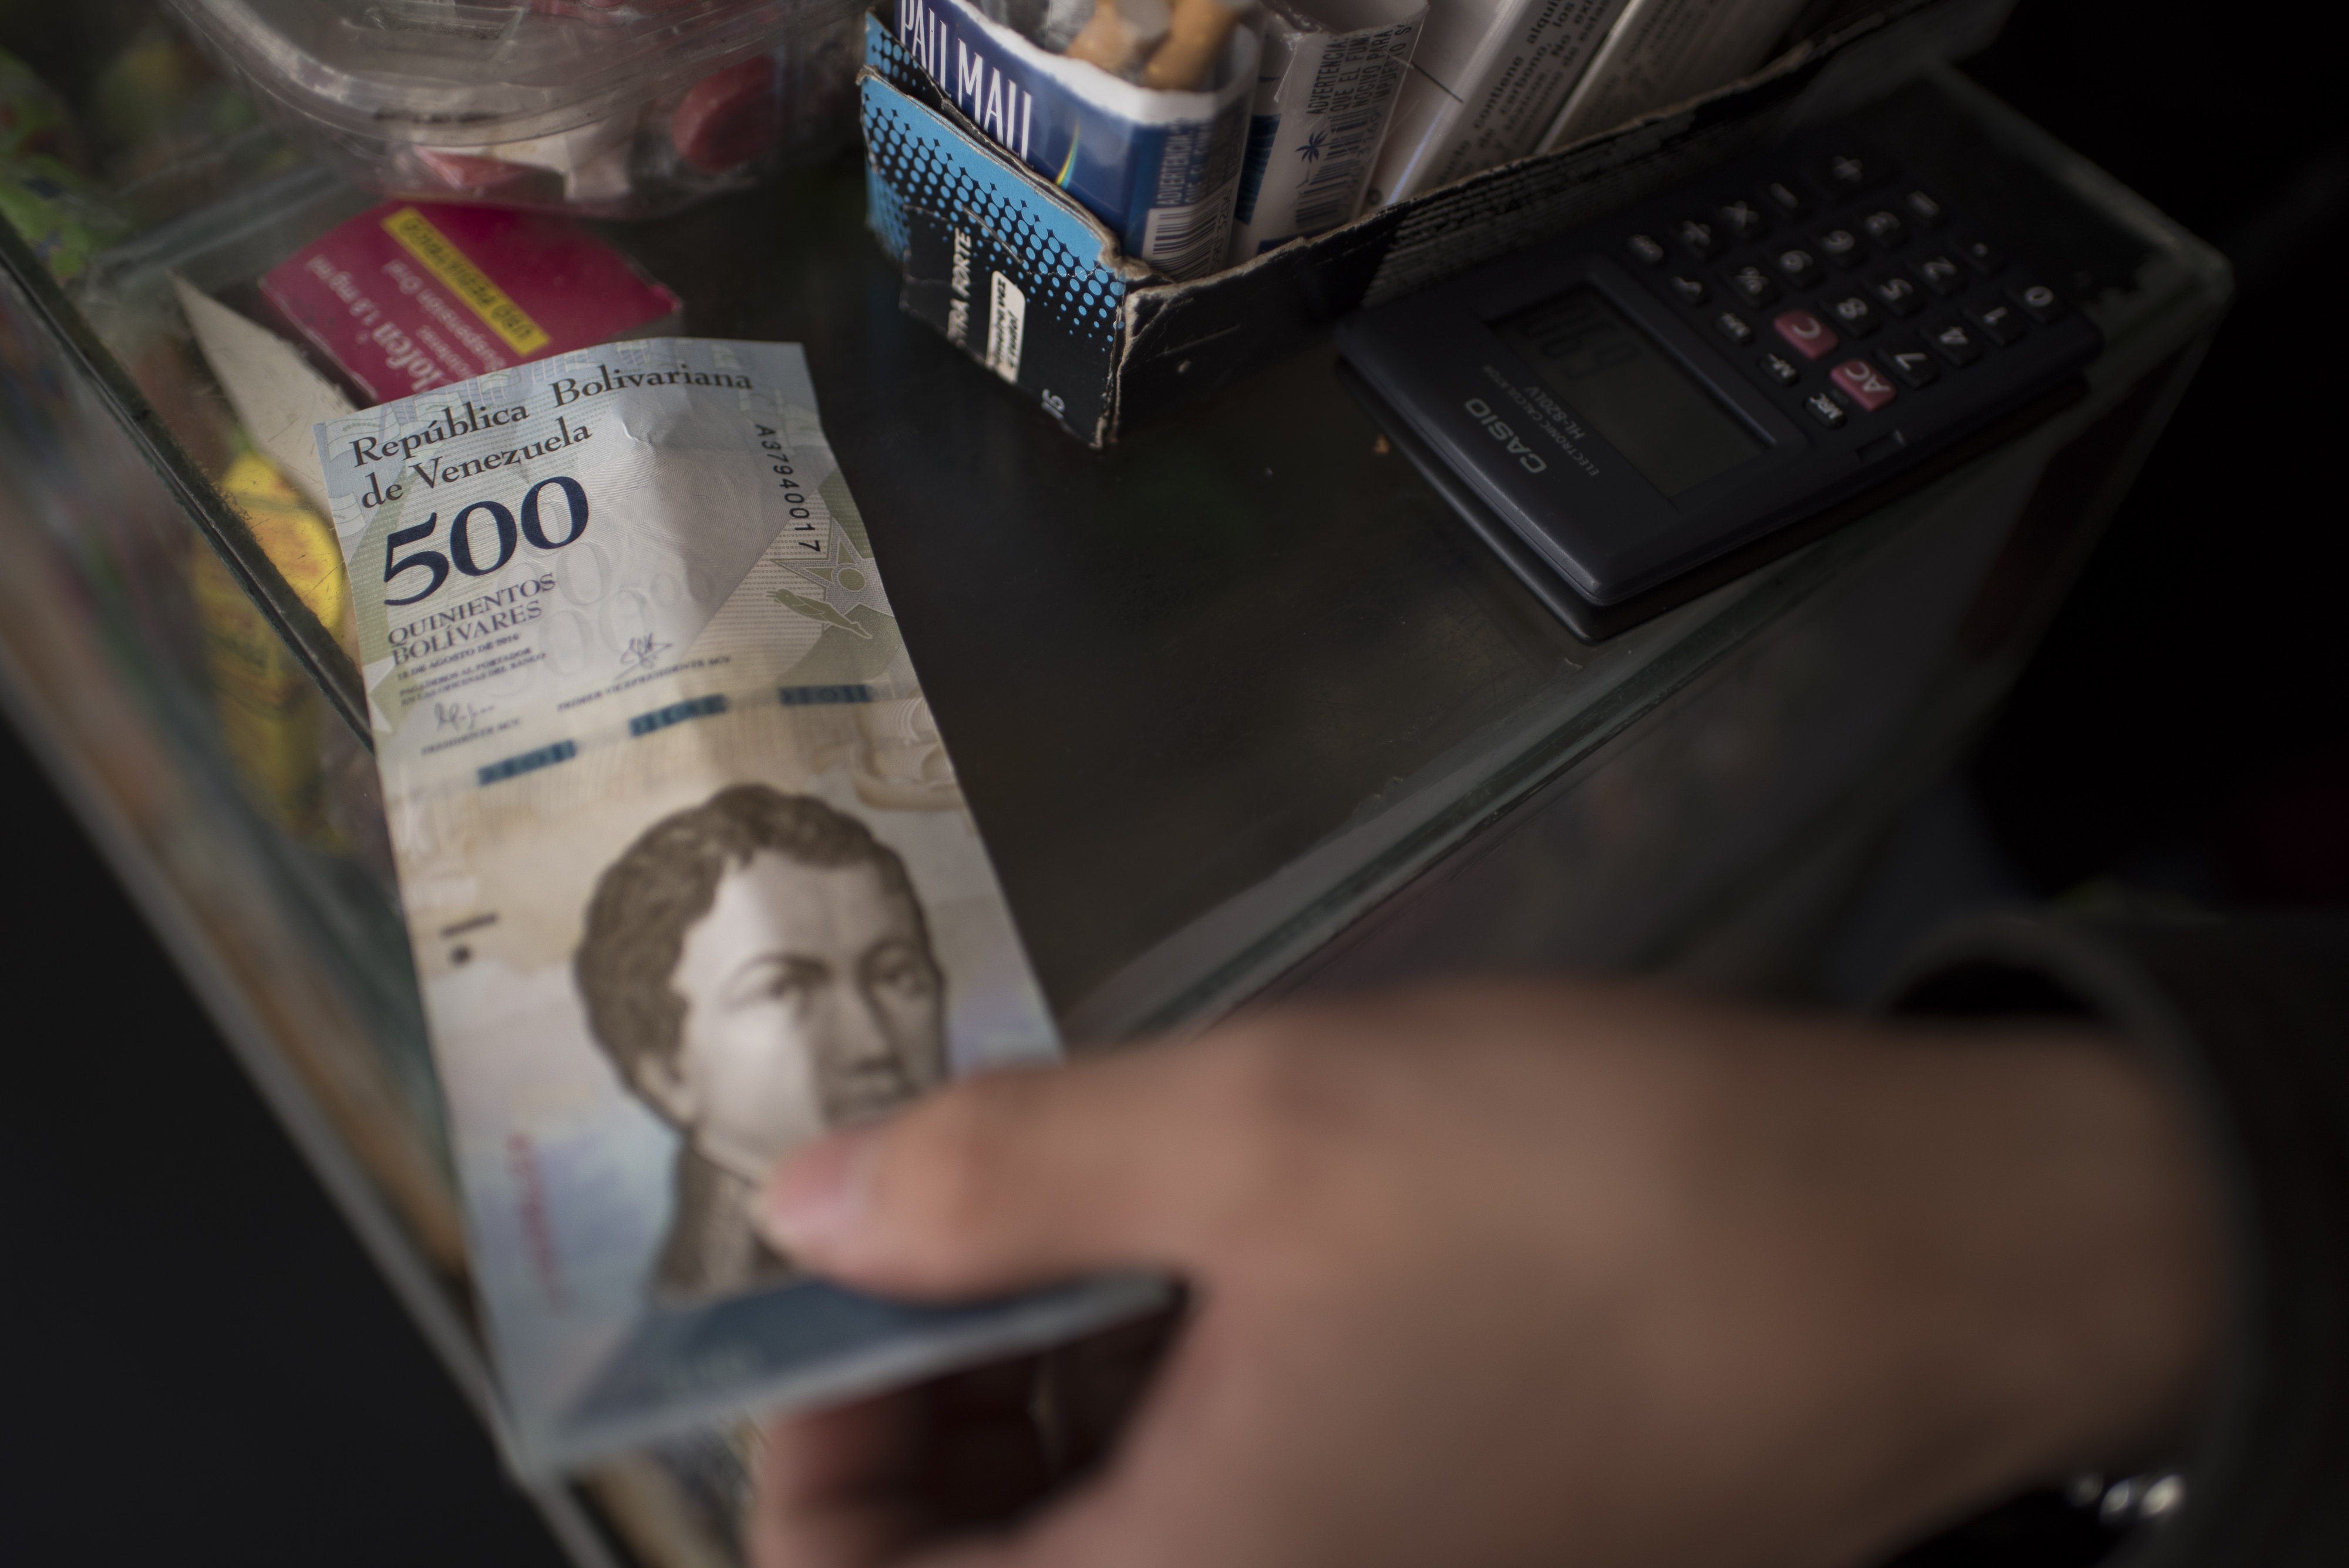 A vendor reaches a new 500-bolivar banknote from a customer at a stand in Caracas on Jan. 17, 2017 (Carlos Becerra—Bloomberg/Getty Images)